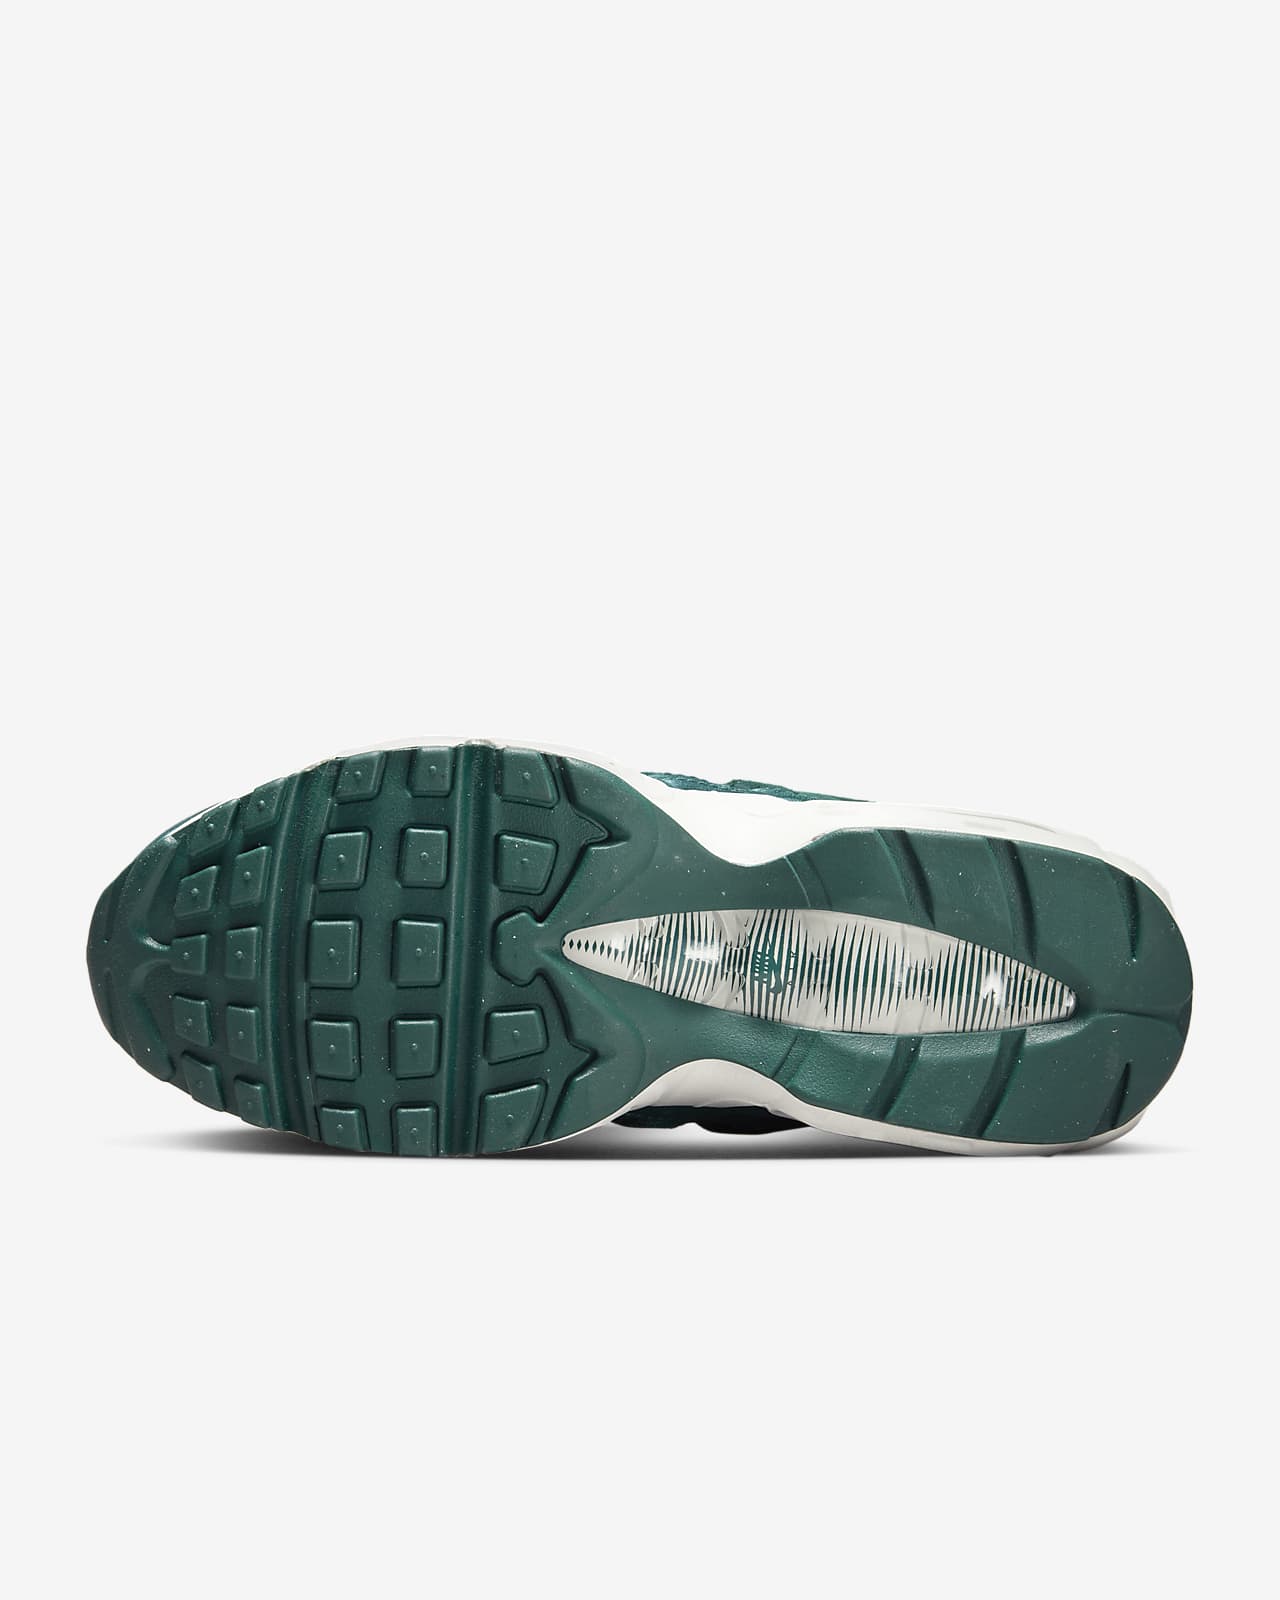 Scrutiny over there visit Nike Air Max 95 Women's Shoes. Nike.com